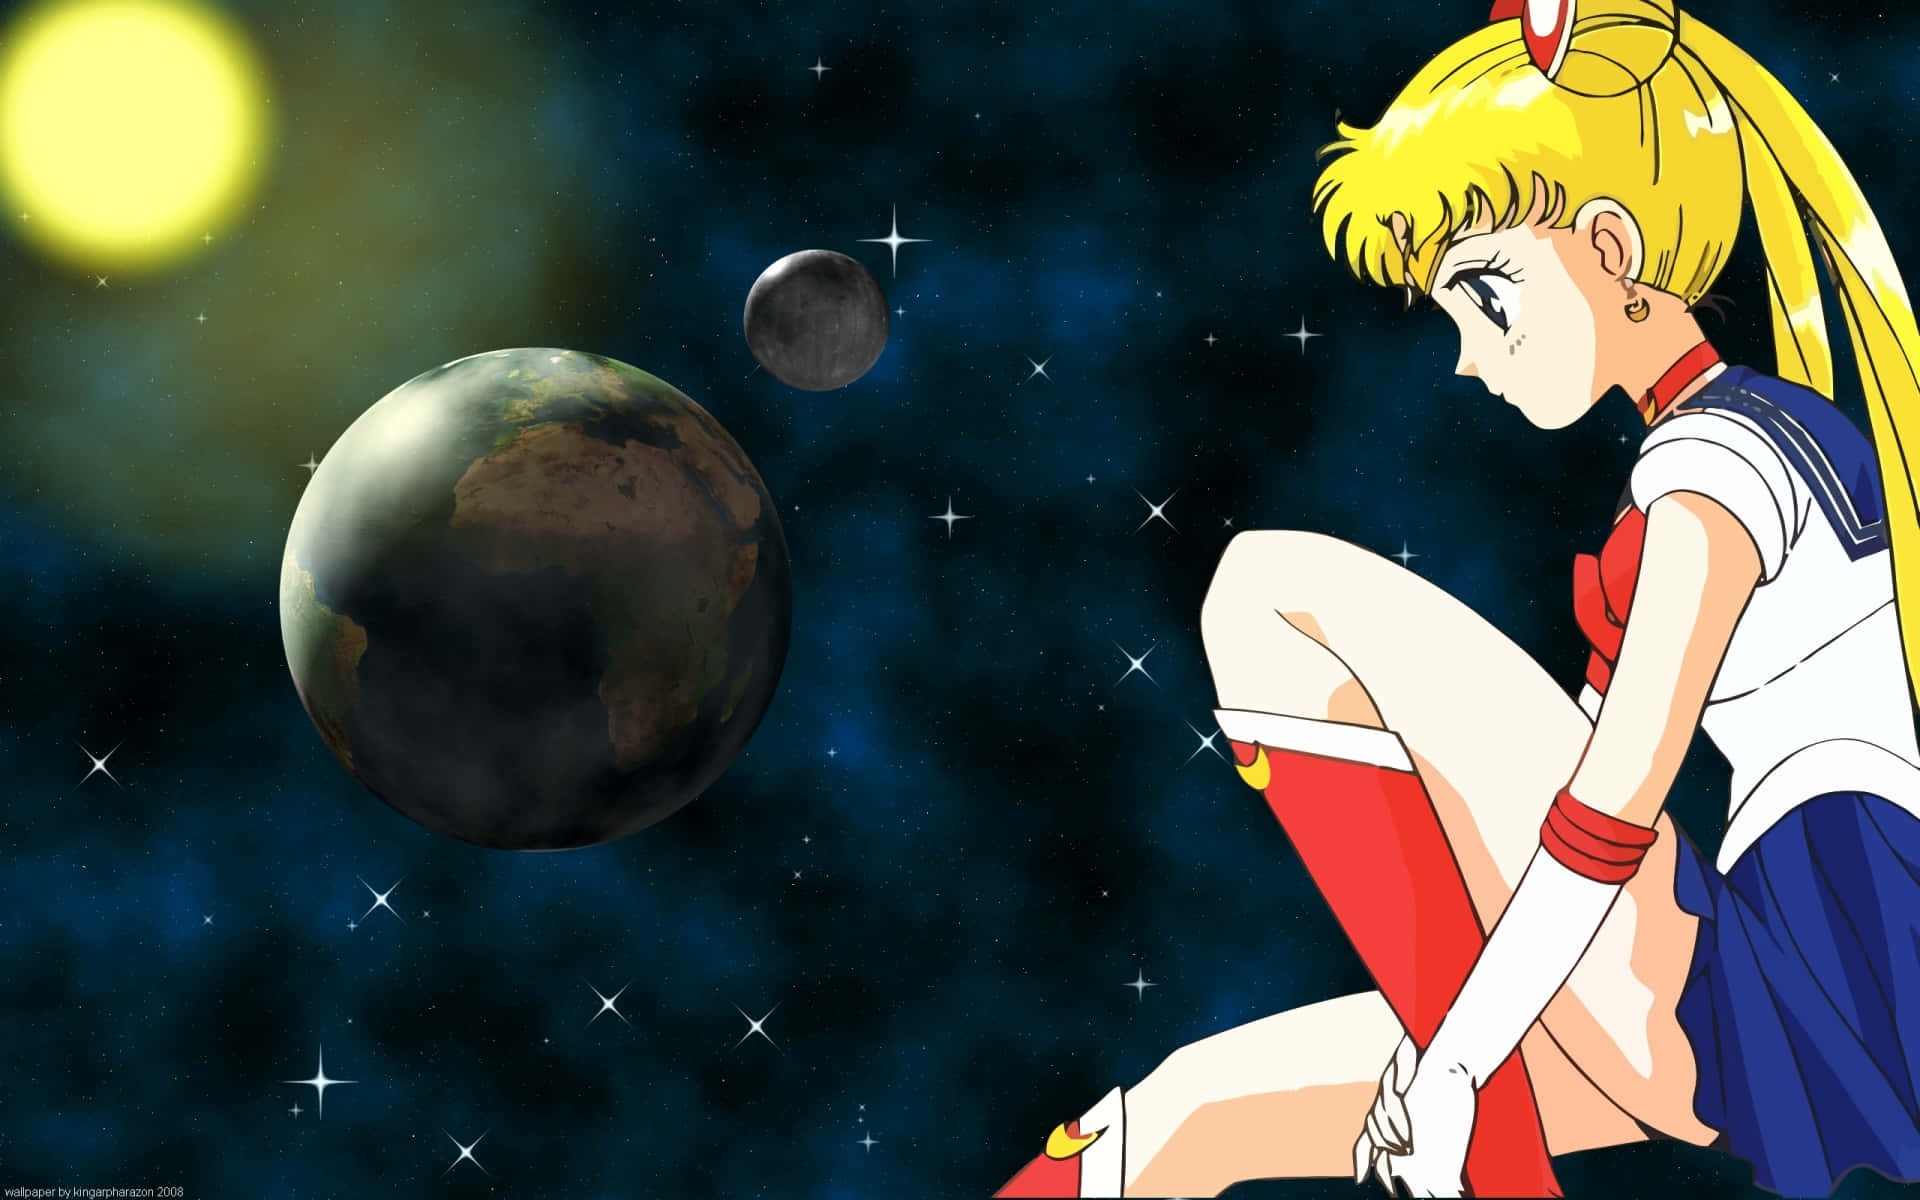 "Sailor Moon harnesses the power of the Moon!"